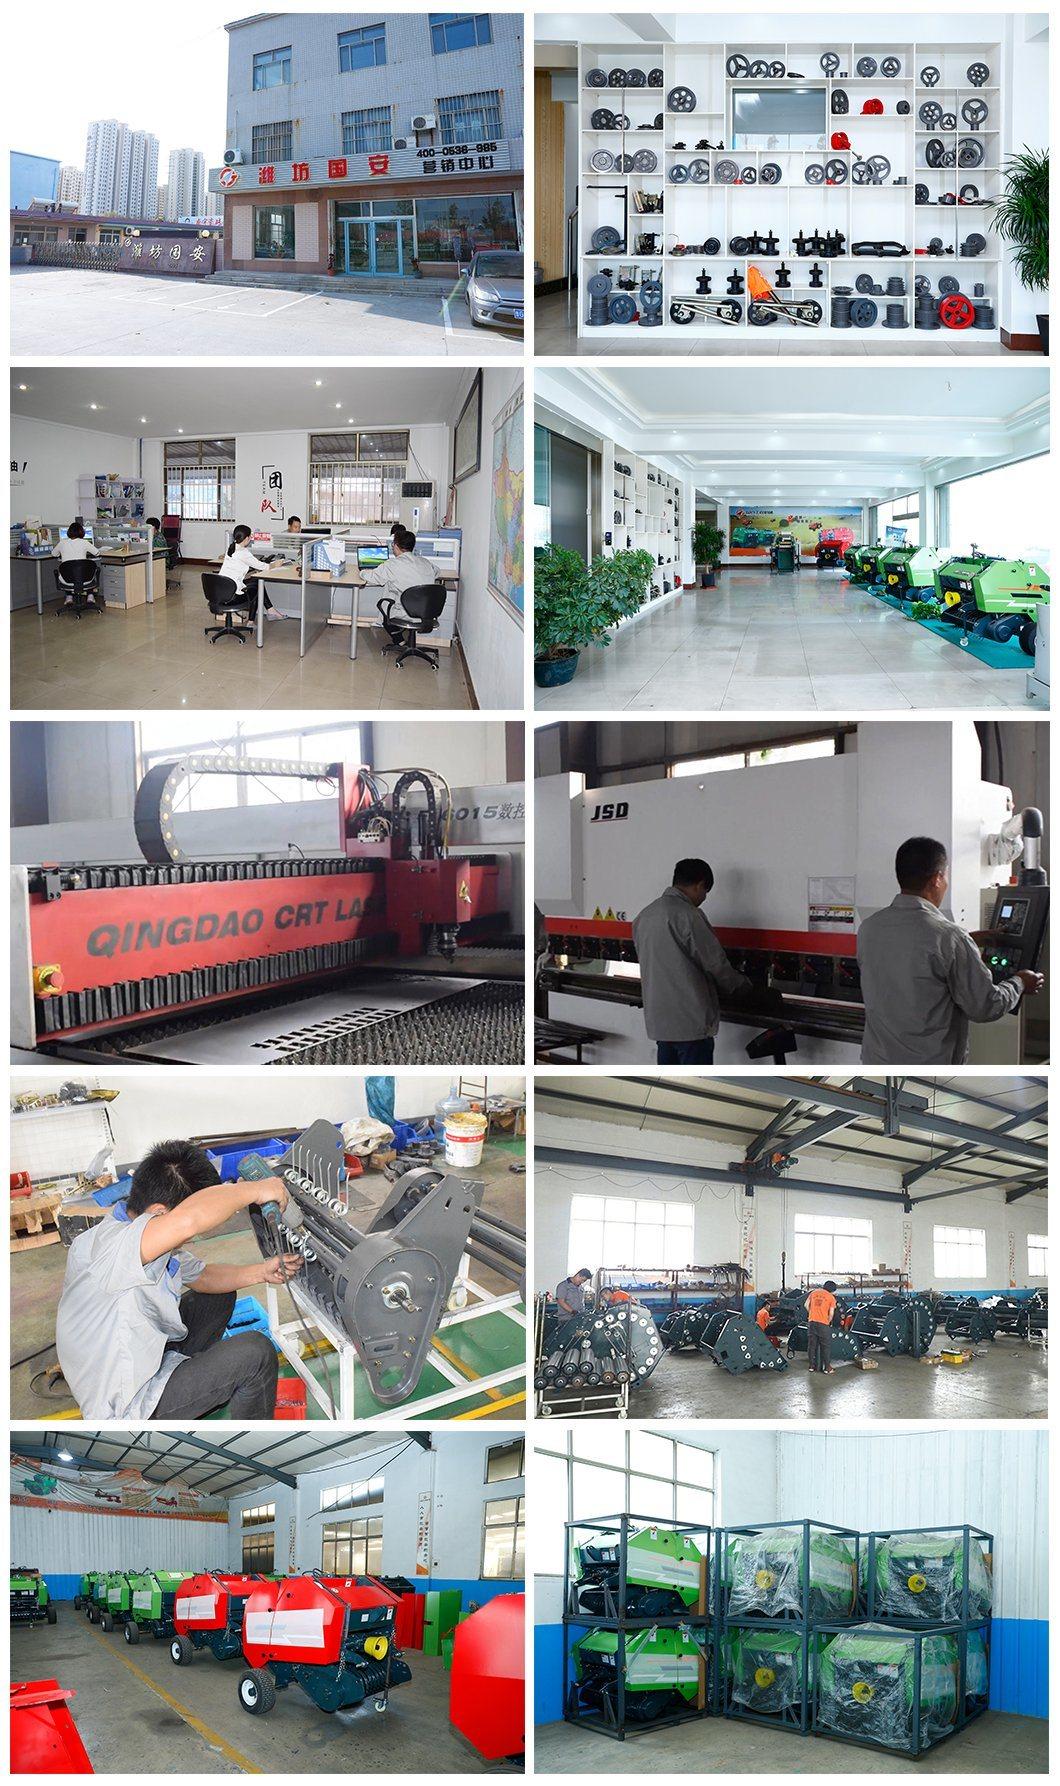 China Best Supplier Full Automatic Hydraulic Compact Round Straw Baler Hay Packing Machine for Sale